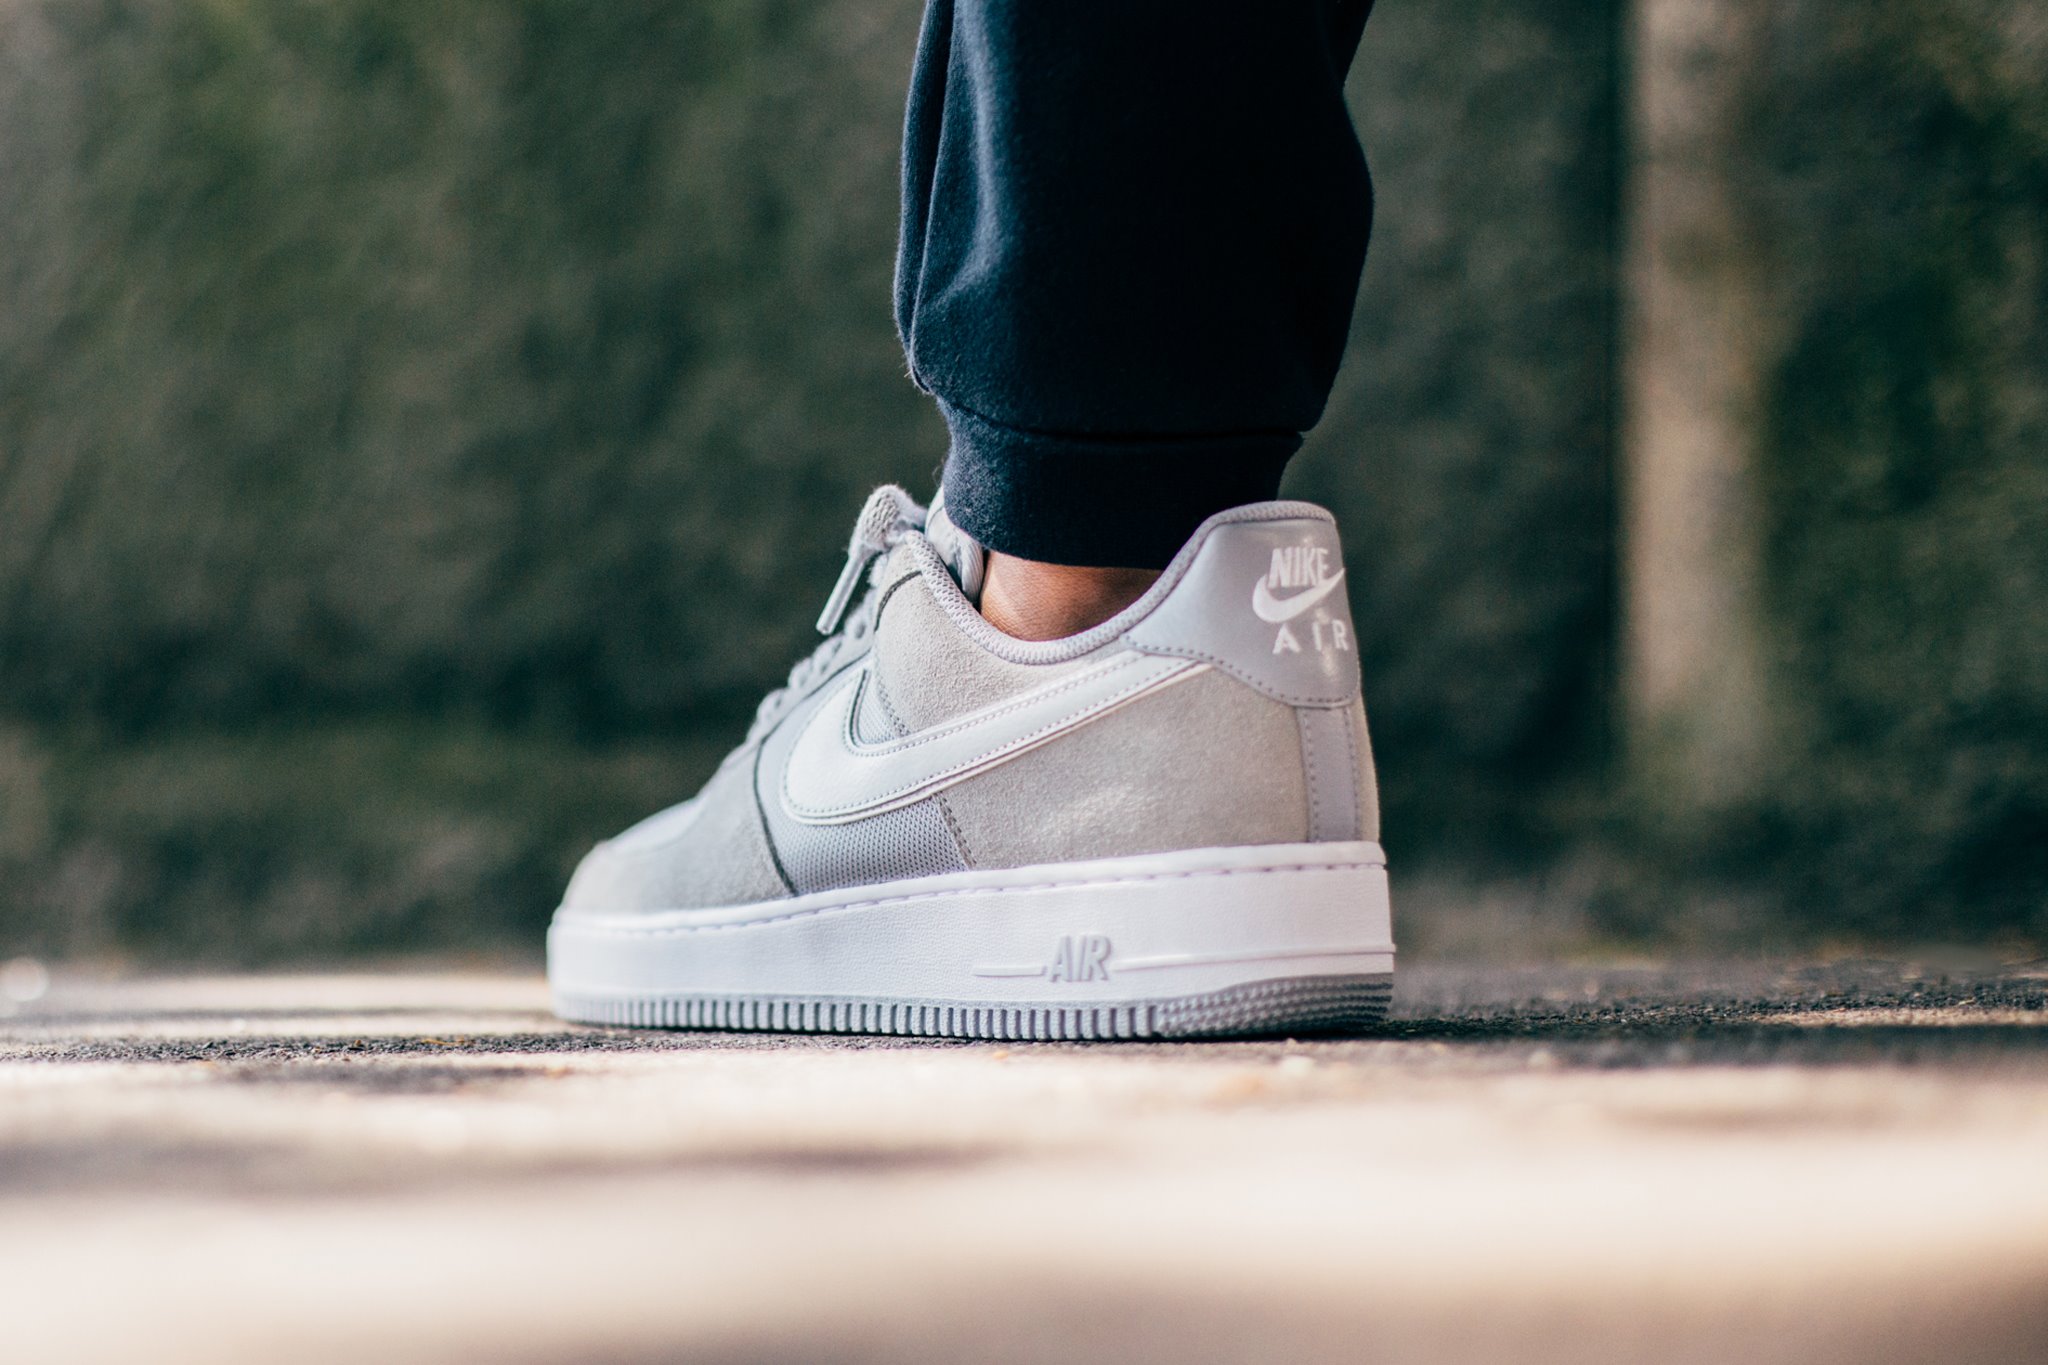 nike air force 1 grey and black suede